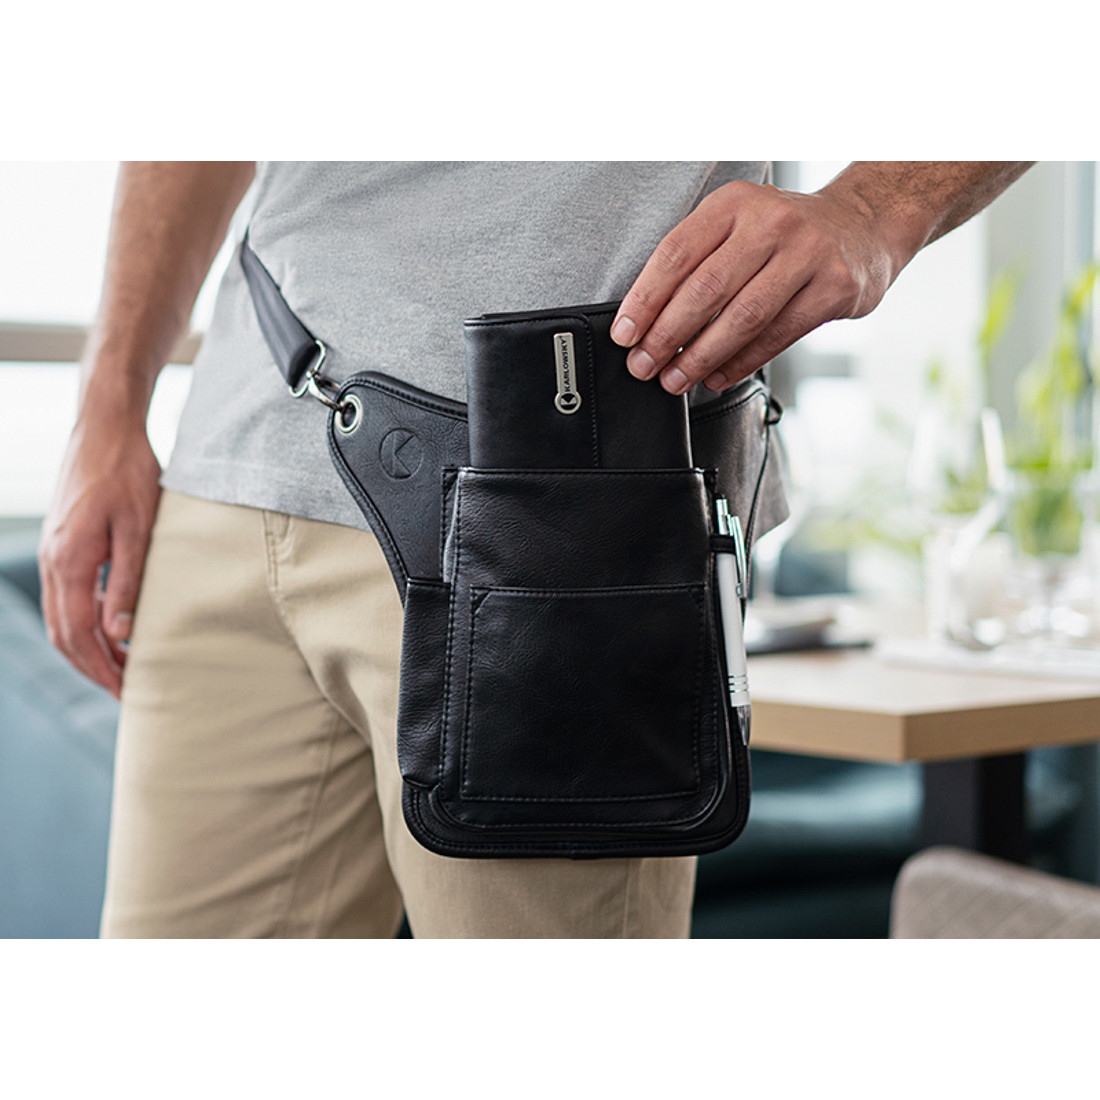 High-Capacity Waiters' Holster with Integrated Belt Harness - Safetywear